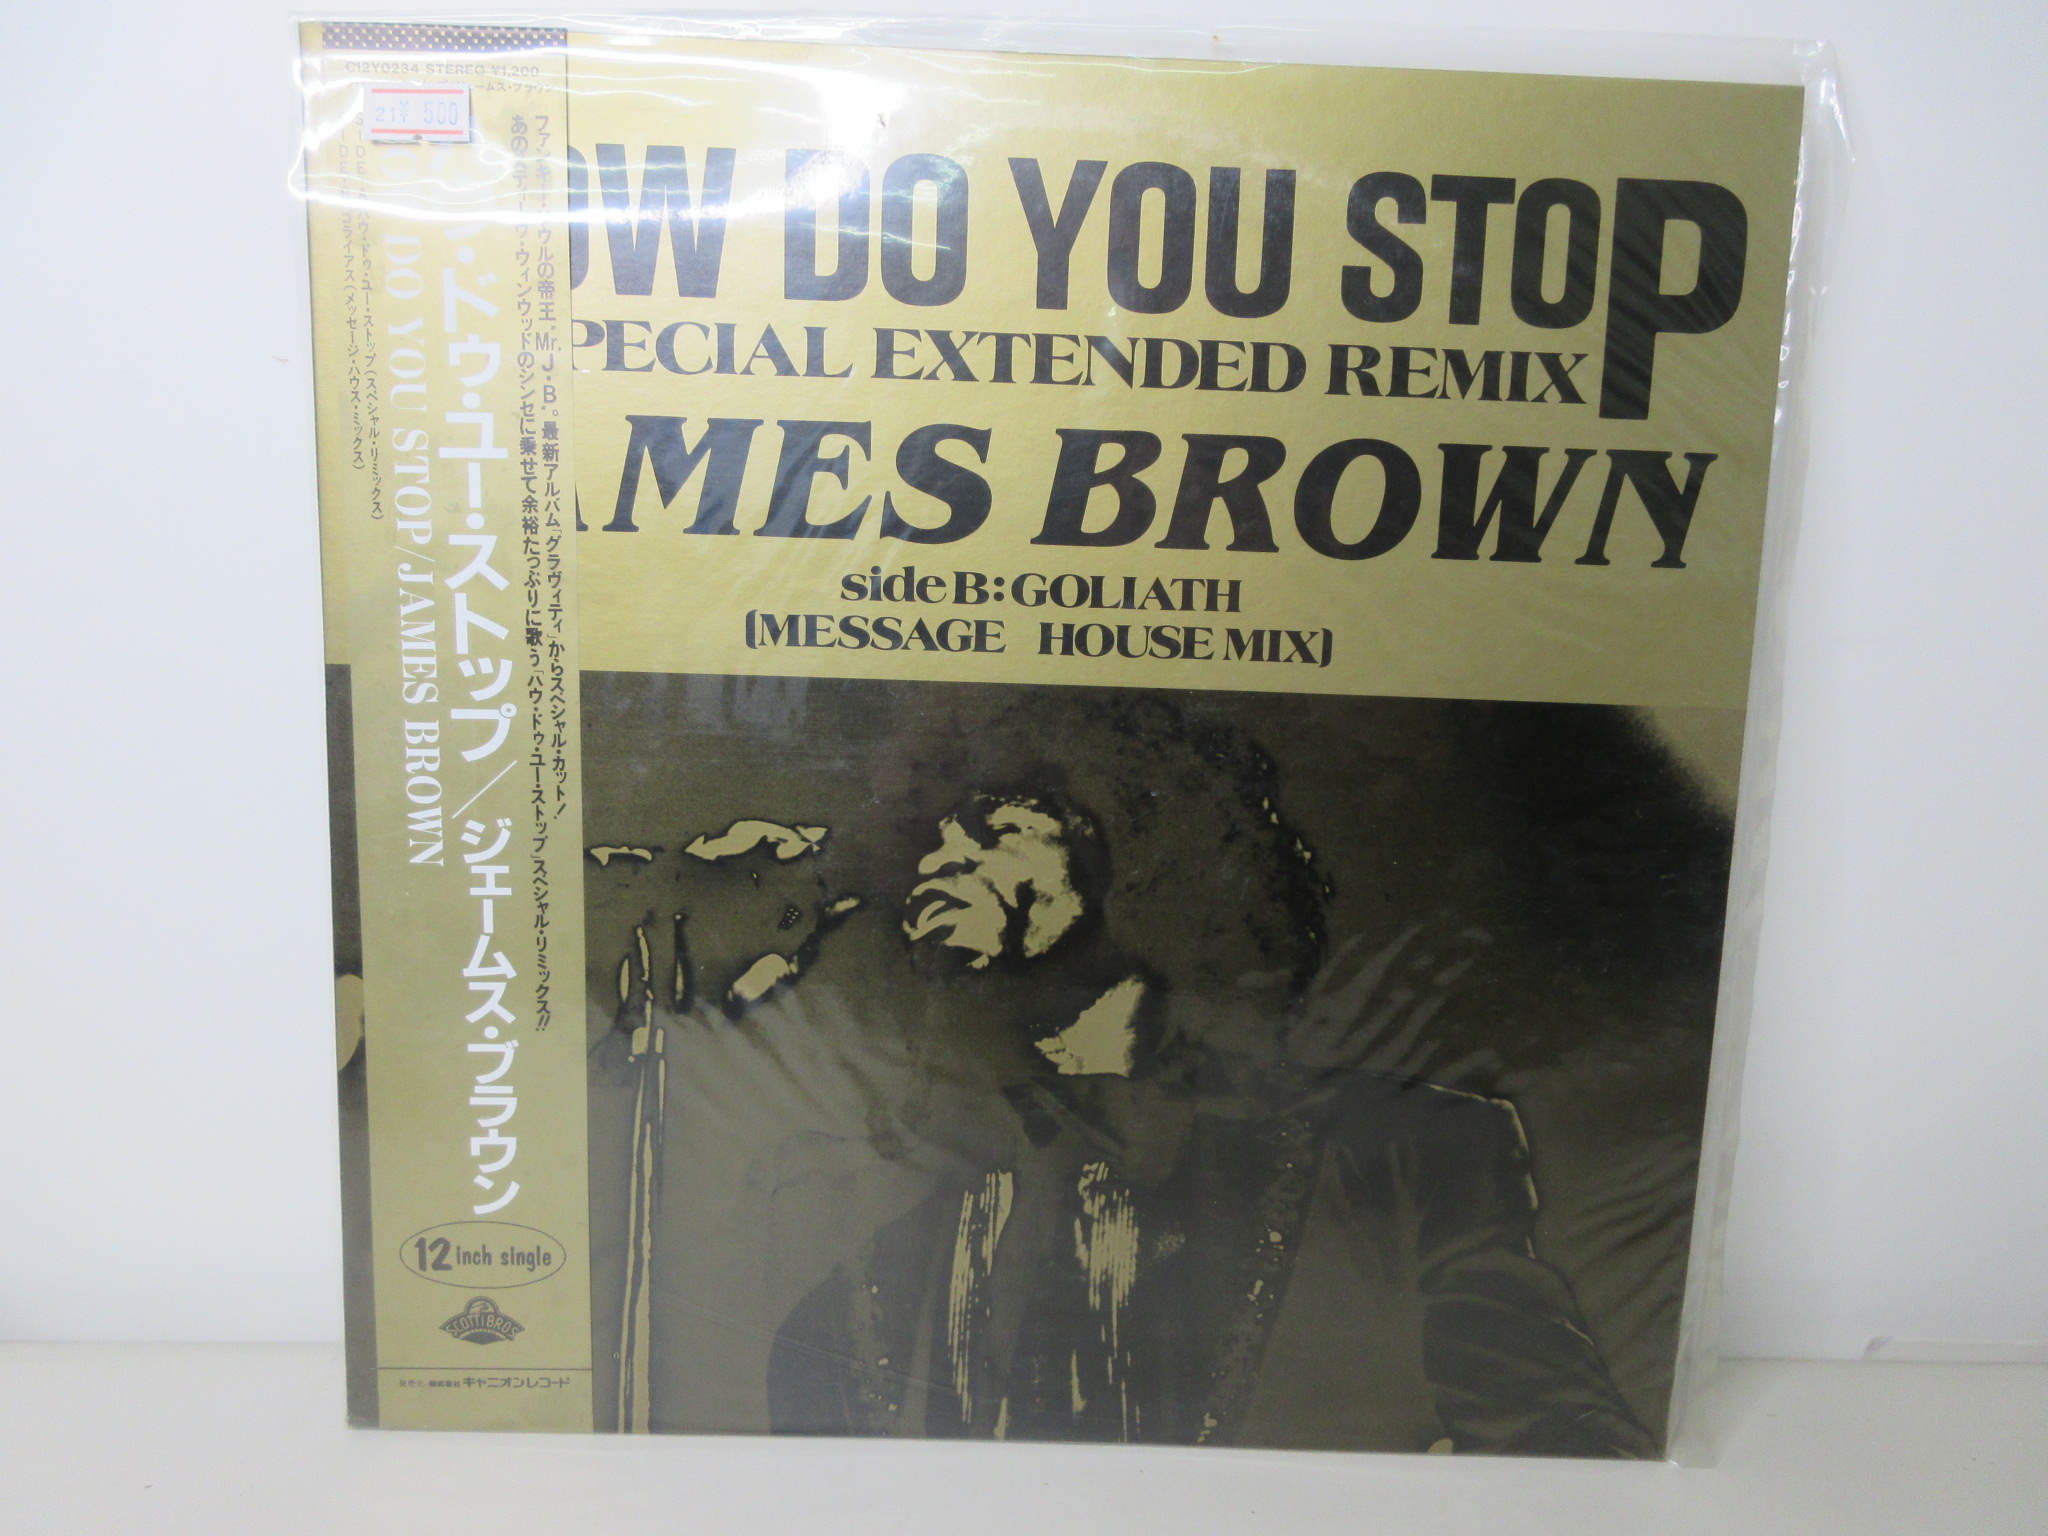 James Brown   How Do You Stop / Goliath  ジェームス・ブラウン　C12Y0234